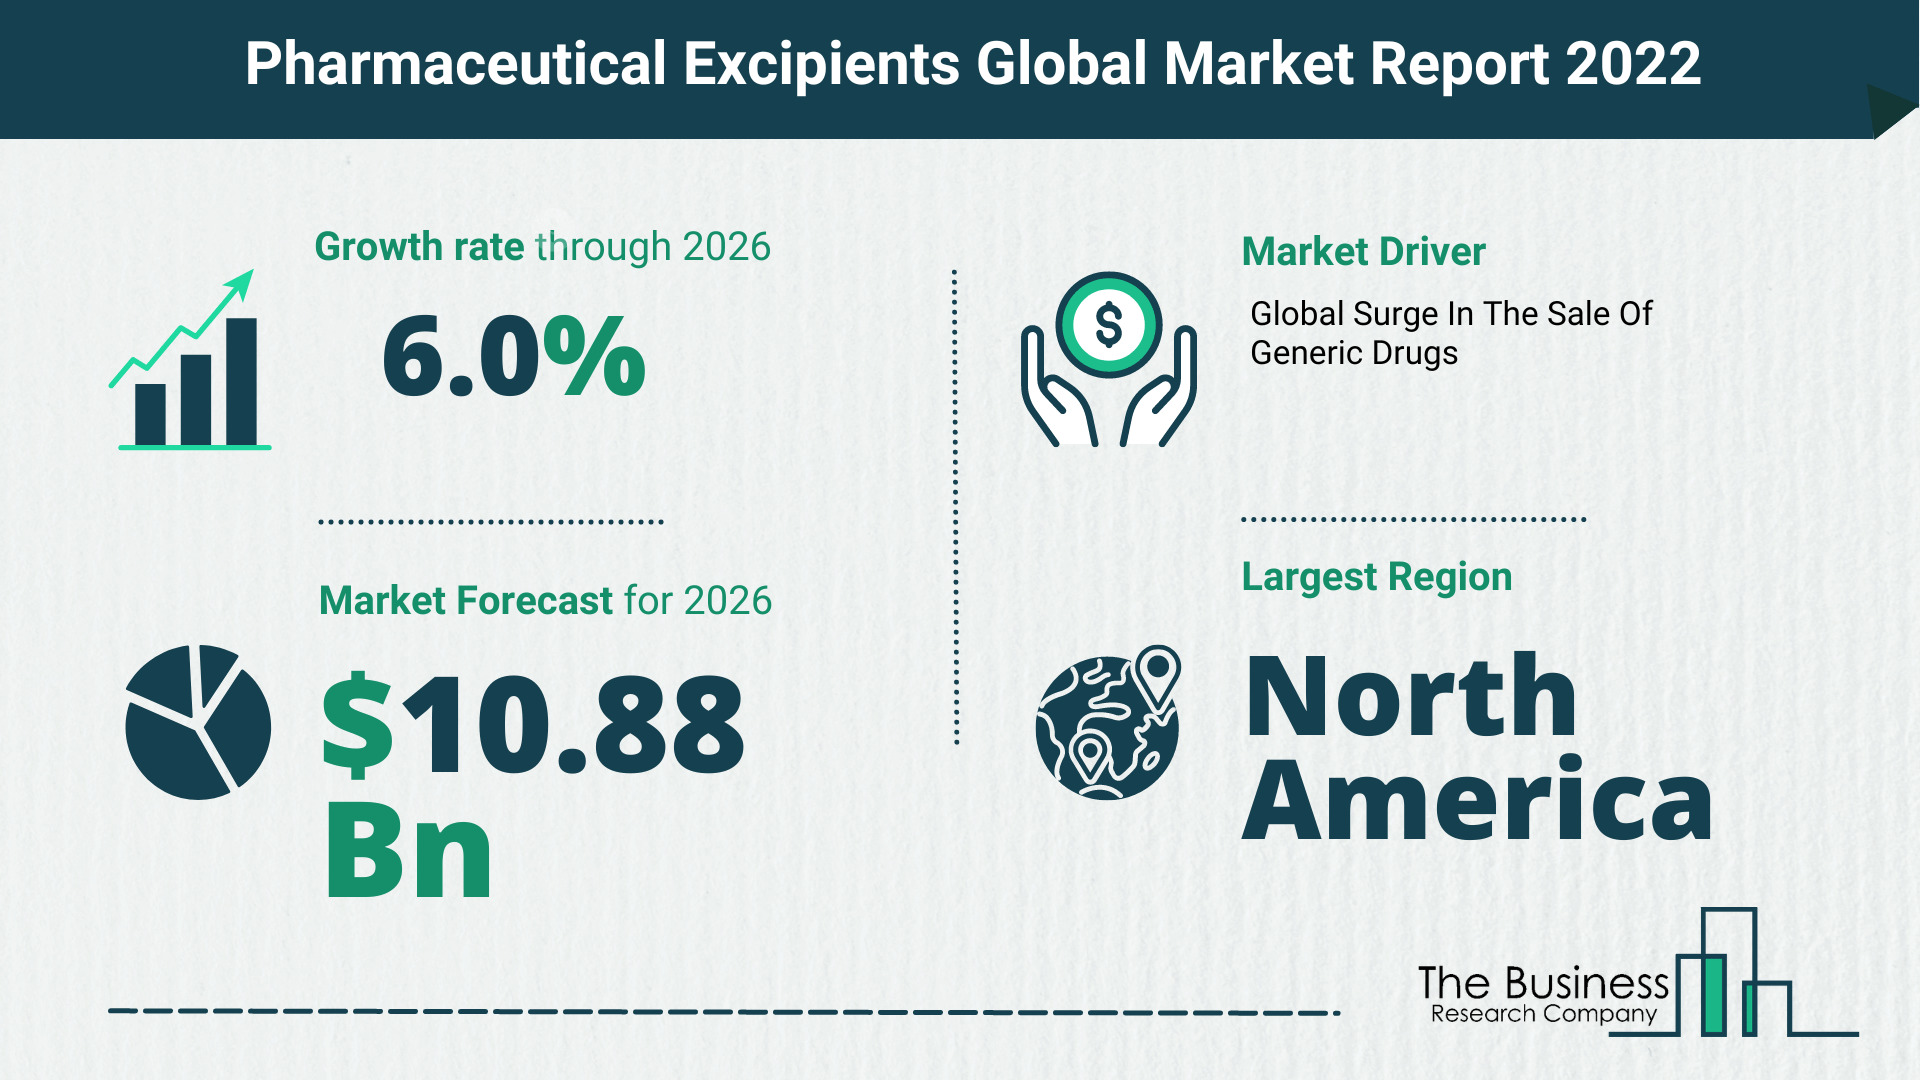 How Will The Pharmaceutical Excipients Market Grow In 2022?